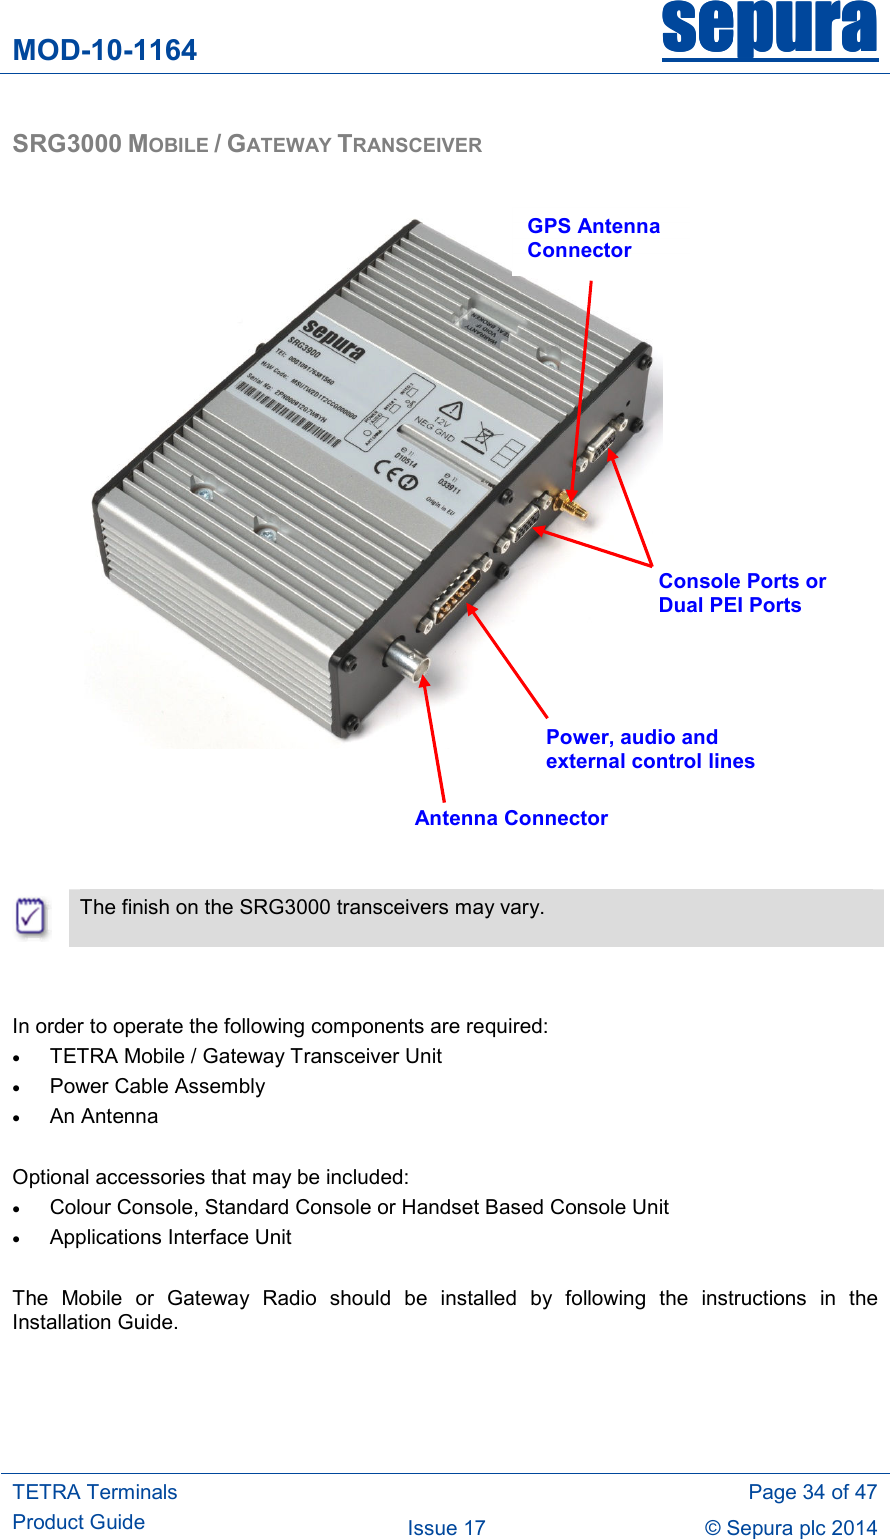 MOD-10-1164 sepurasepurasepurasepura     TETRA Terminals Product Guide   Page 34 of 47 Issue 17  © Sepura plc 2014   SRG3000 MOBILE / GATEWAY TRANSCEIVER                          The finish on the SRG3000 transceivers may vary.   In order to operate the following components are required: • TETRA Mobile / Gateway Transceiver Unit • Power Cable Assembly • An Antenna  Optional accessories that may be included: • Colour Console, Standard Console or Handset Based Console Unit • Applications Interface Unit  The  Mobile  or  Gateway  Radio  should  be  installed  by  following  the  instructions  in  the Installation Guide.    Antenna Connector Power, audio and external control lines Console Ports or Dual PEI Ports GPS Antenna Connector 